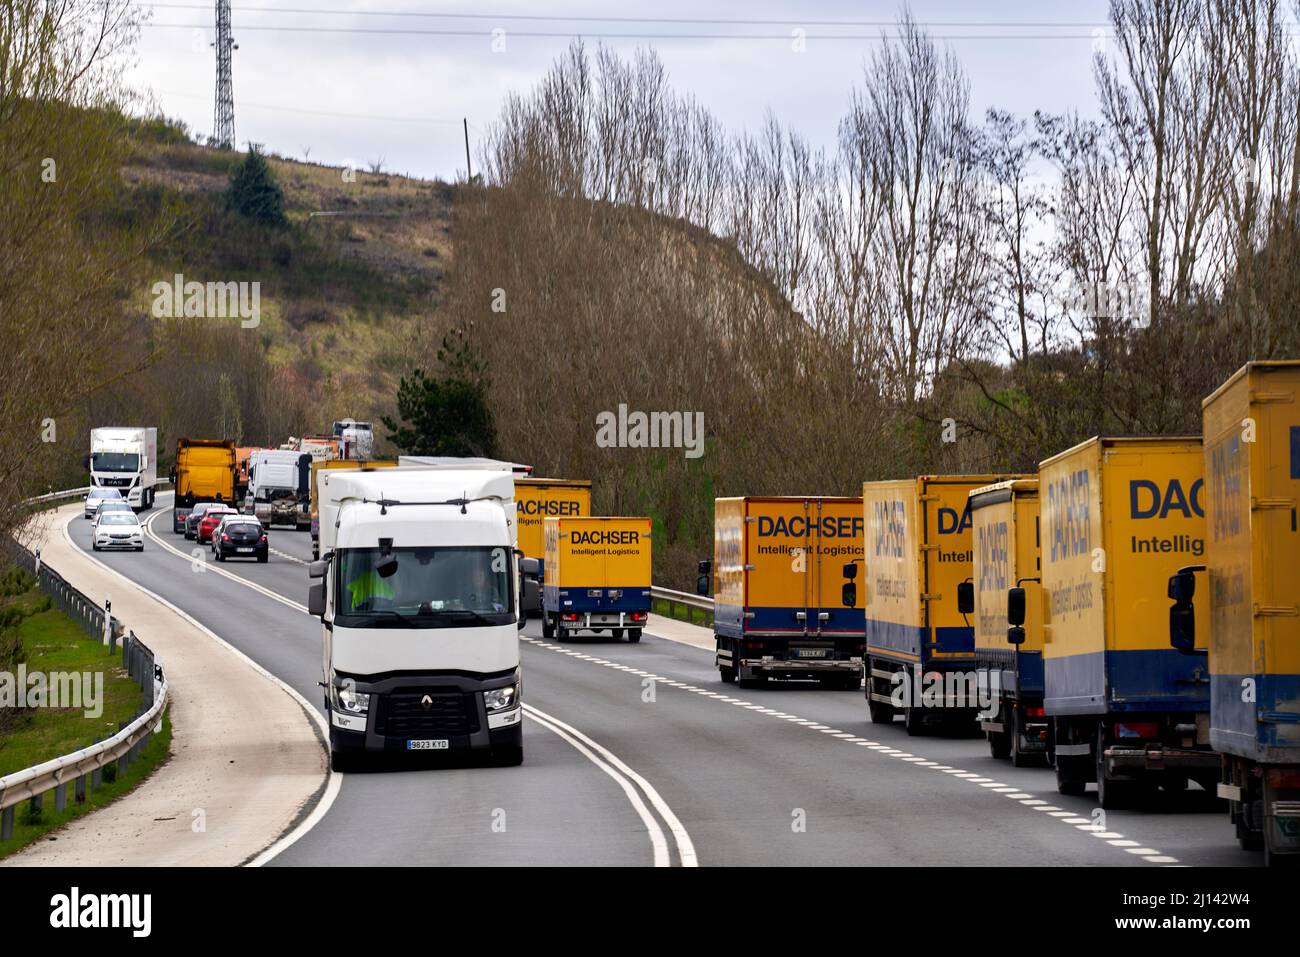 Pamplona, Sapin 22 march, truck strike blocking traffic in protest of high fuel prices Stock Photo